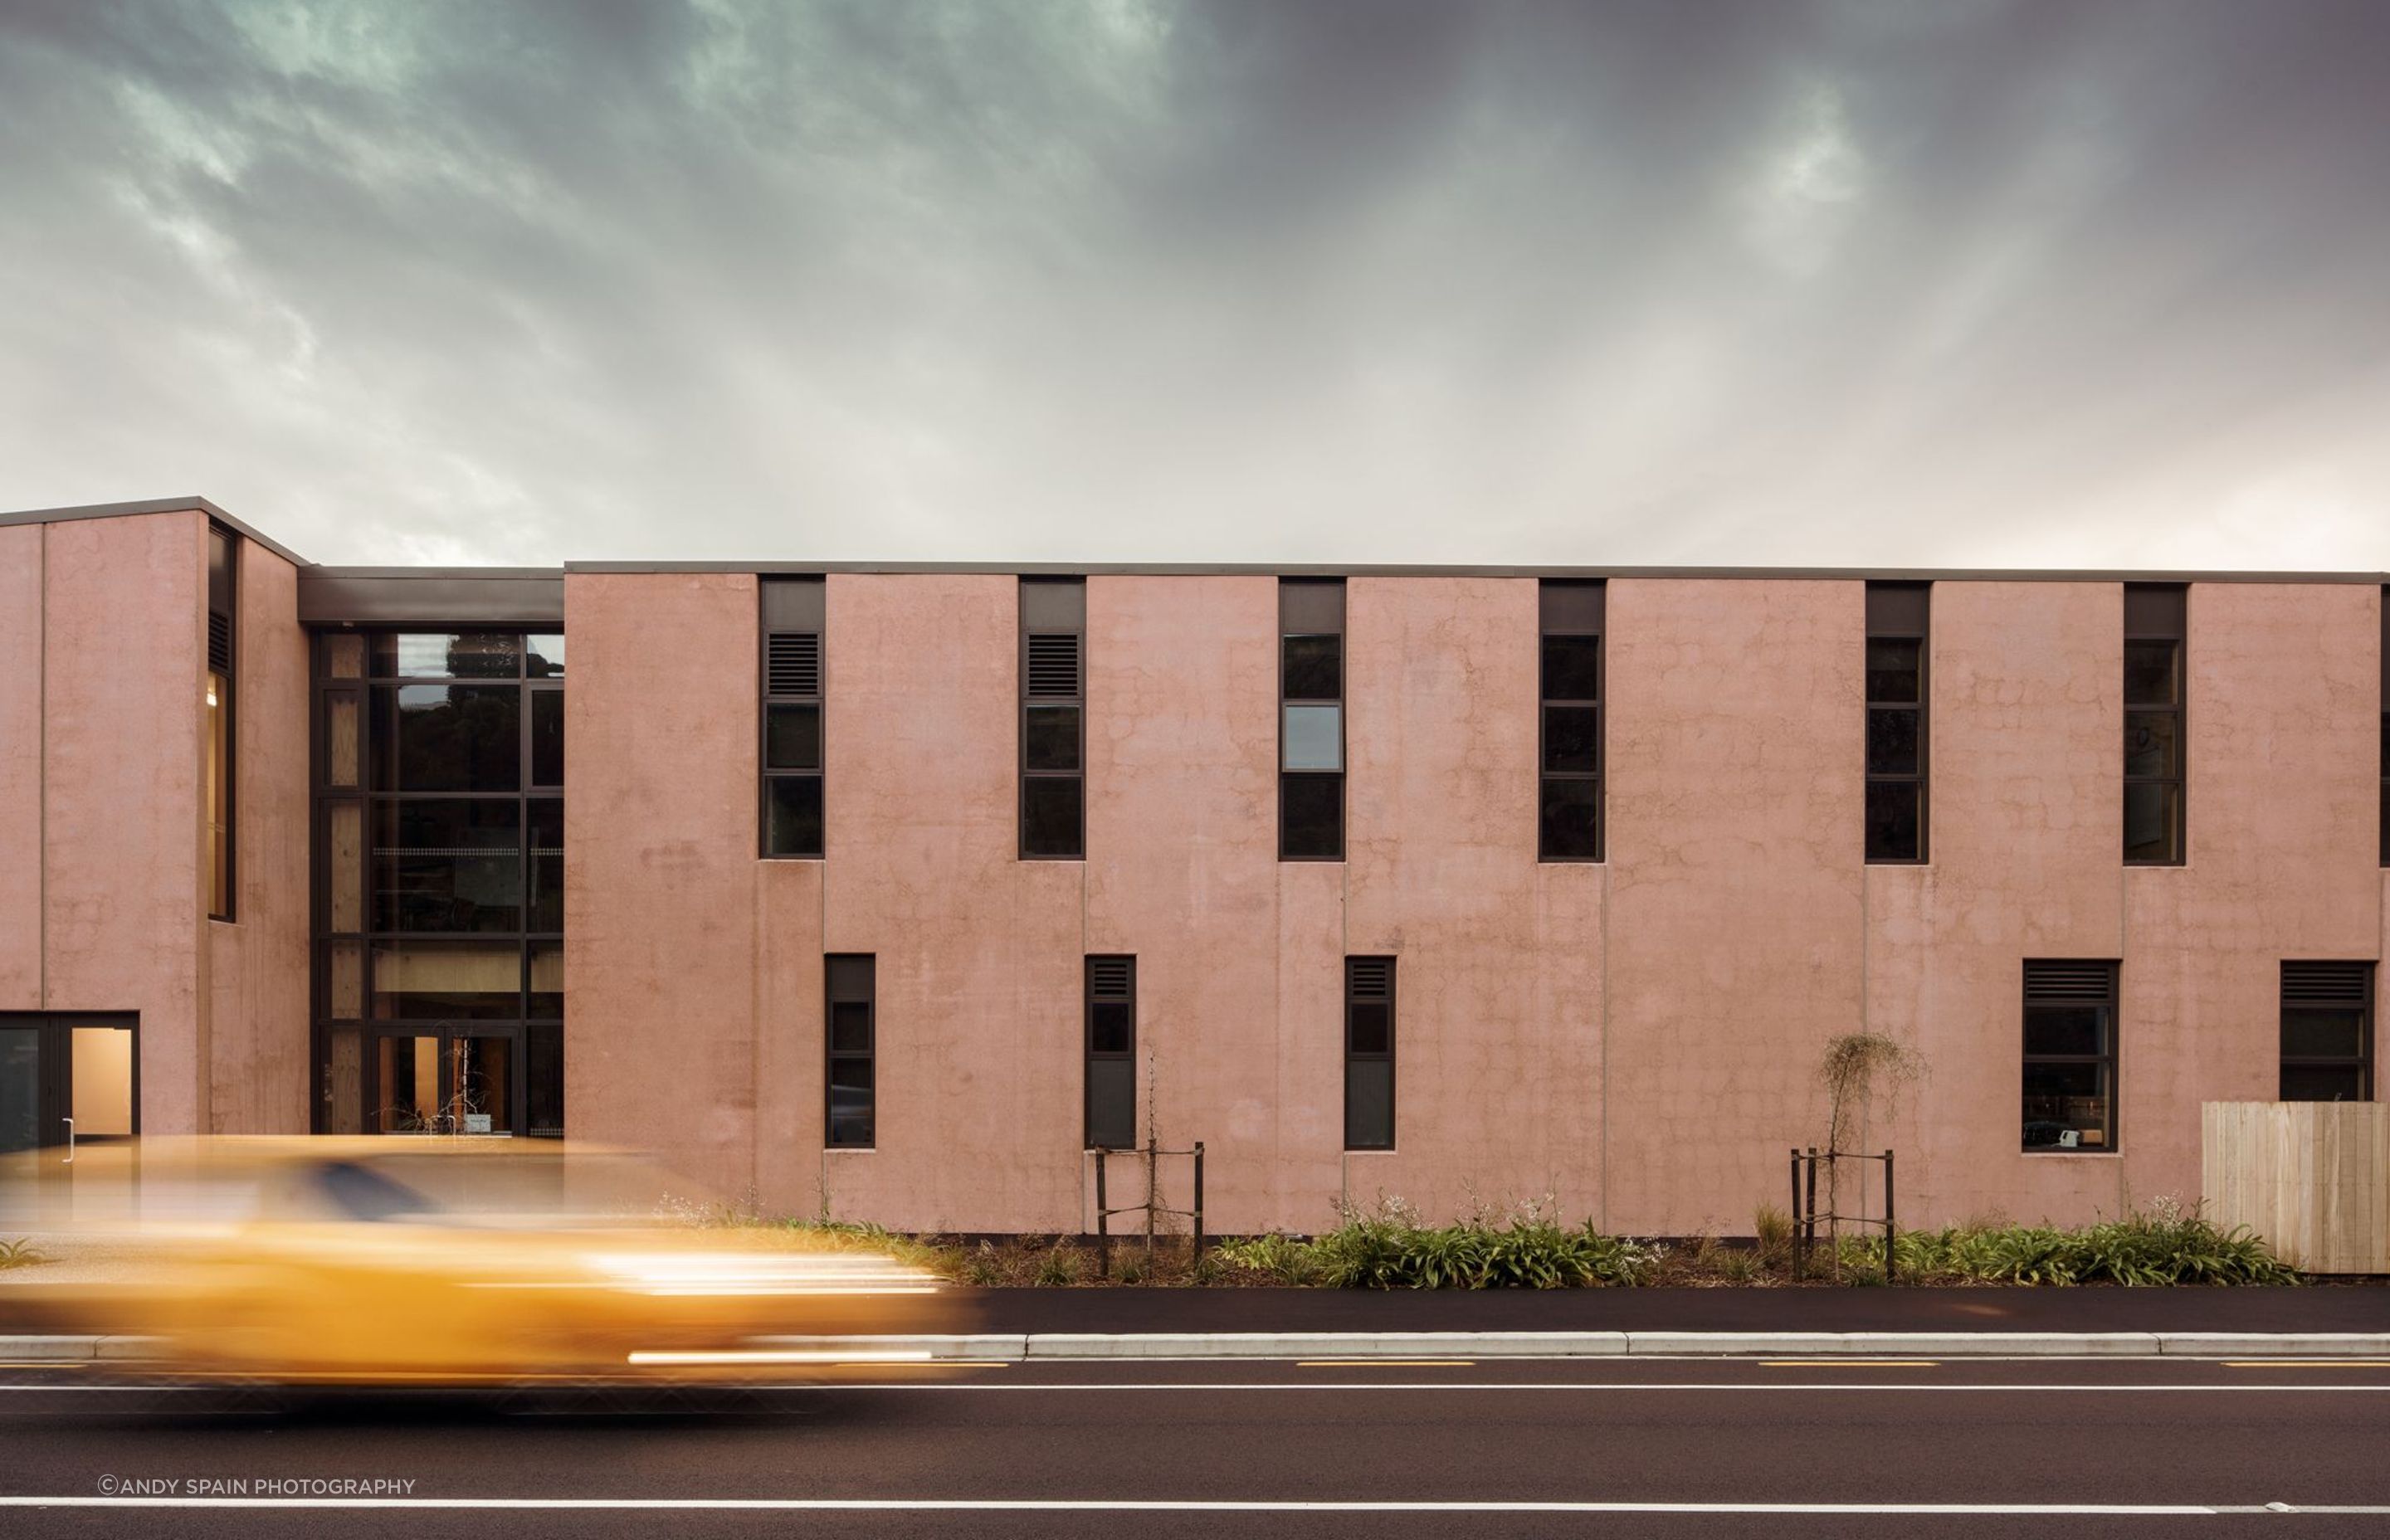 Referencing the cliffs and moa caves across the road, the street-facing facade of the school is a 60 metre-long, 8 metre-high series of modulating openings and setbacks arranged from precast concrete.